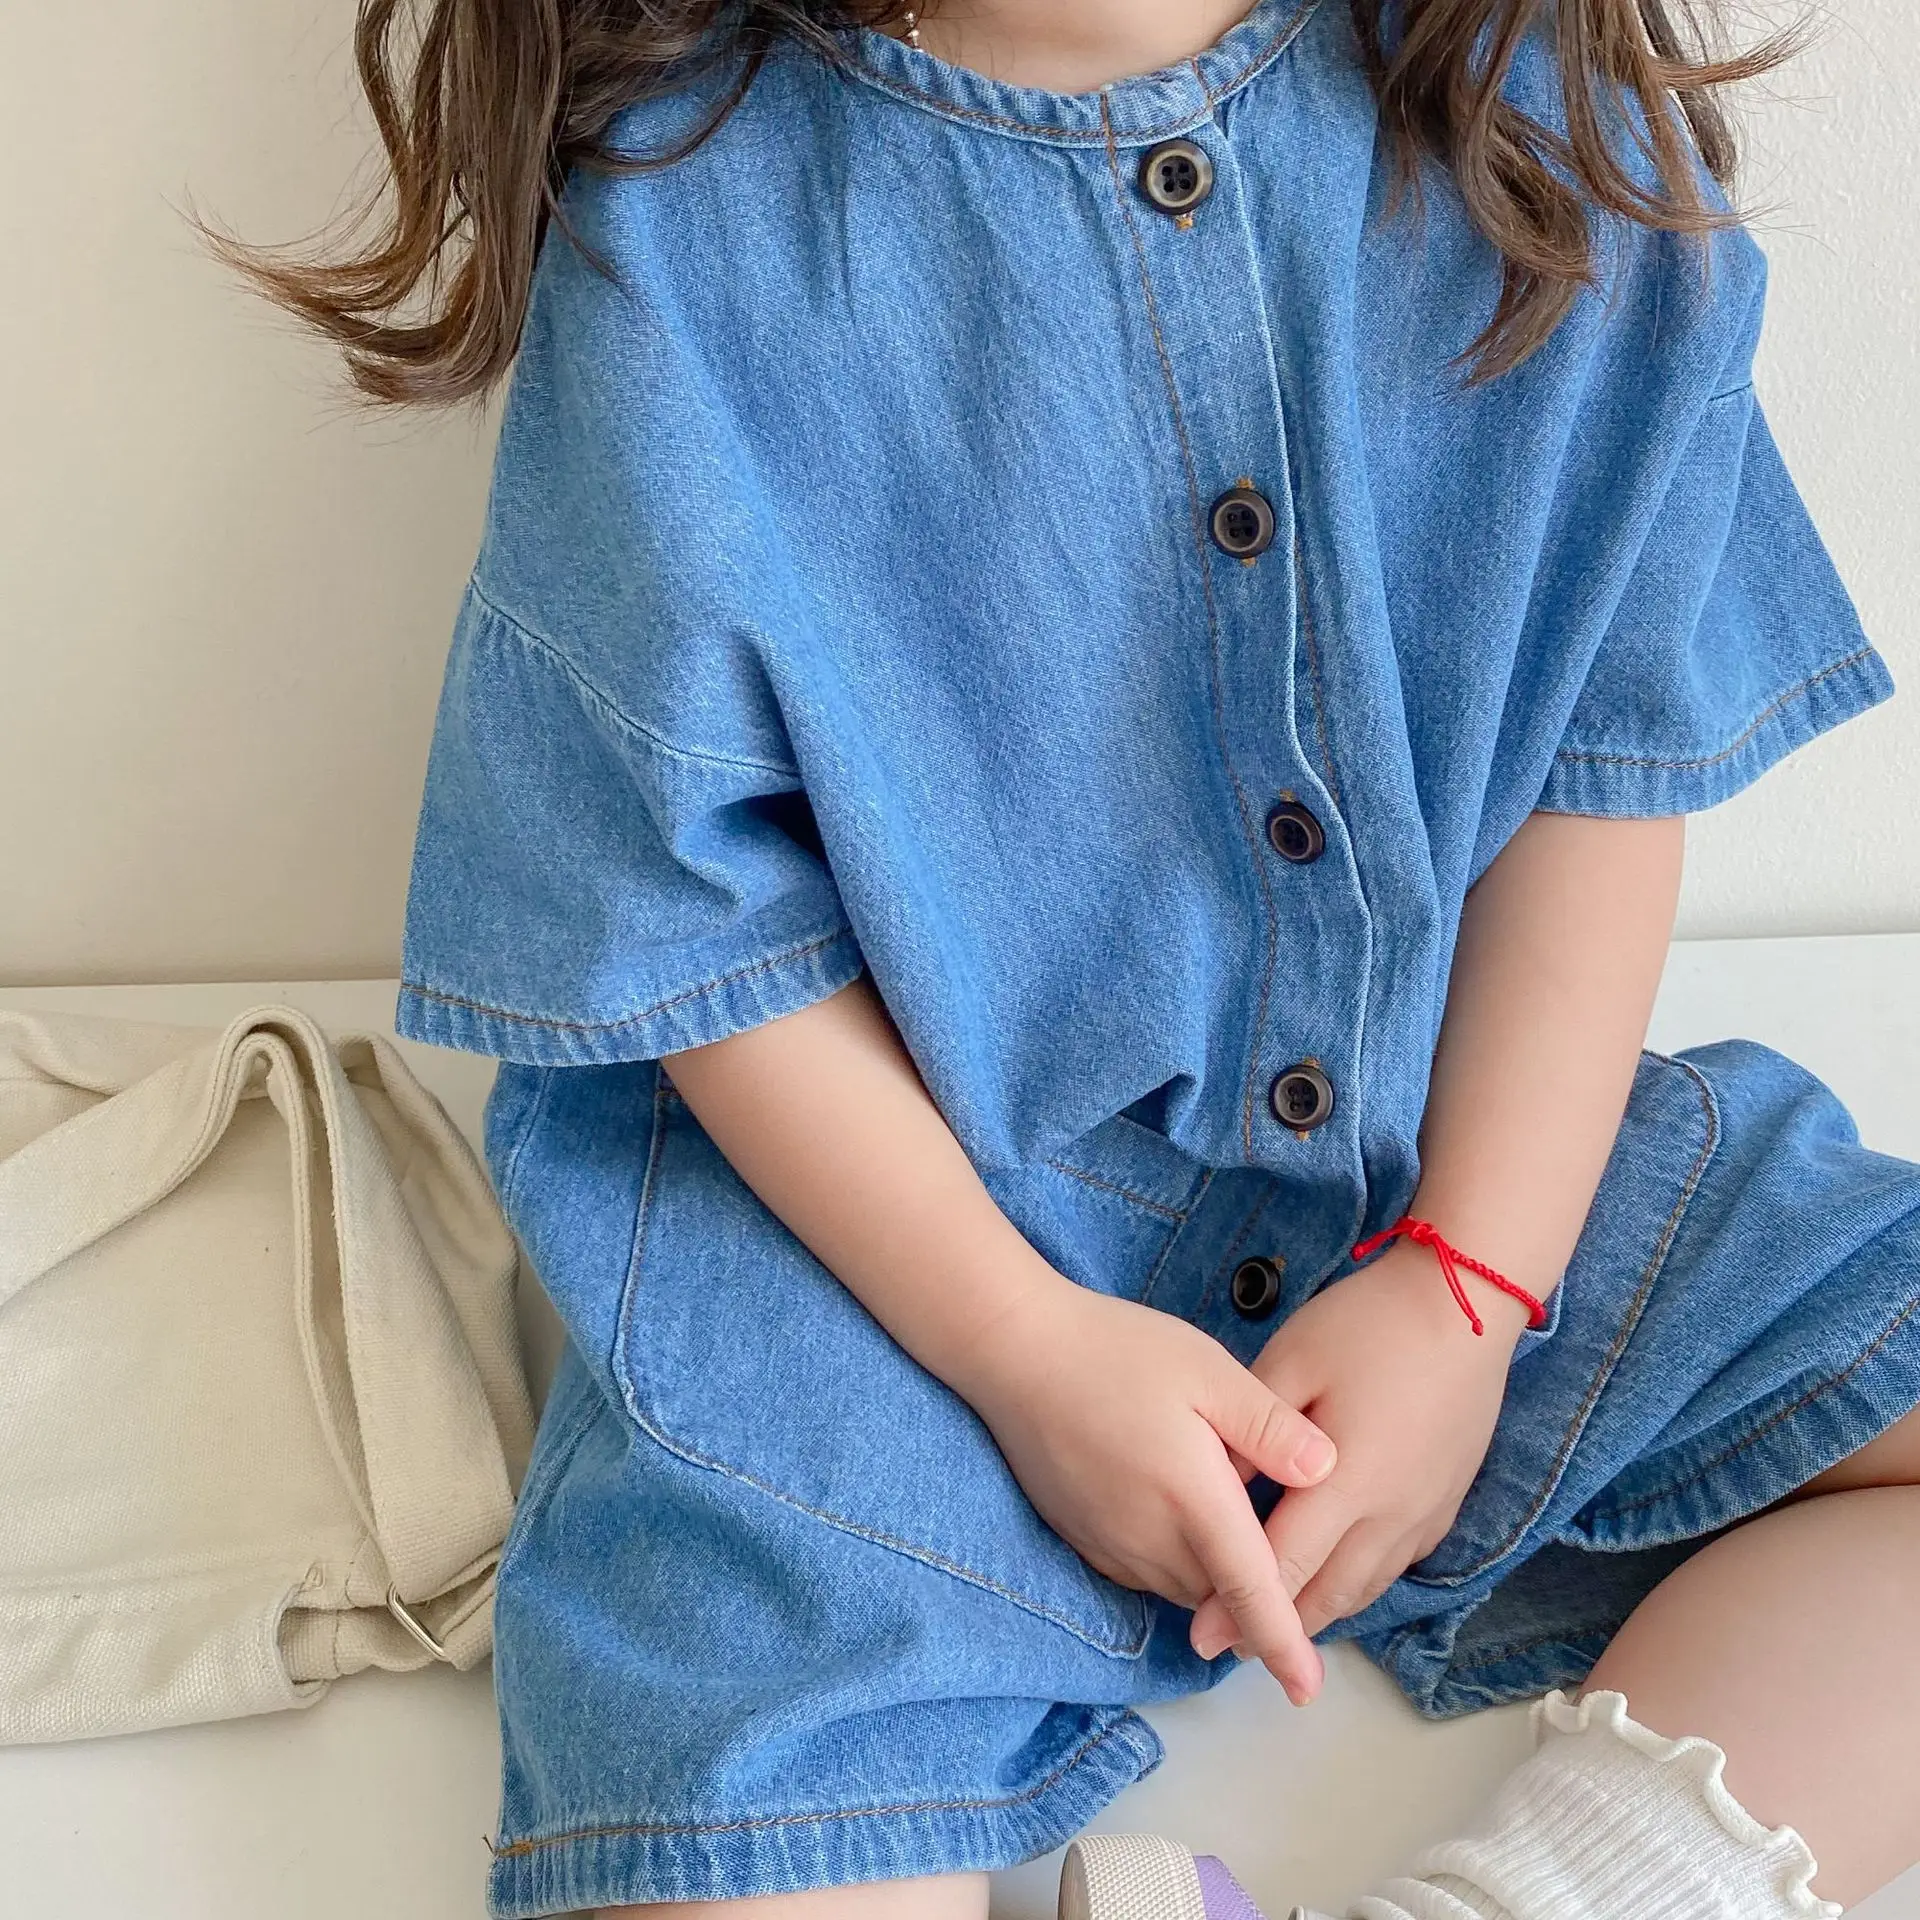 Kids Denim Jumpsuit Children's Jeans Overalls For Girls Boys Shorts Rompers 2022 New Summer Baby Toddler One Piece Clothes Pants